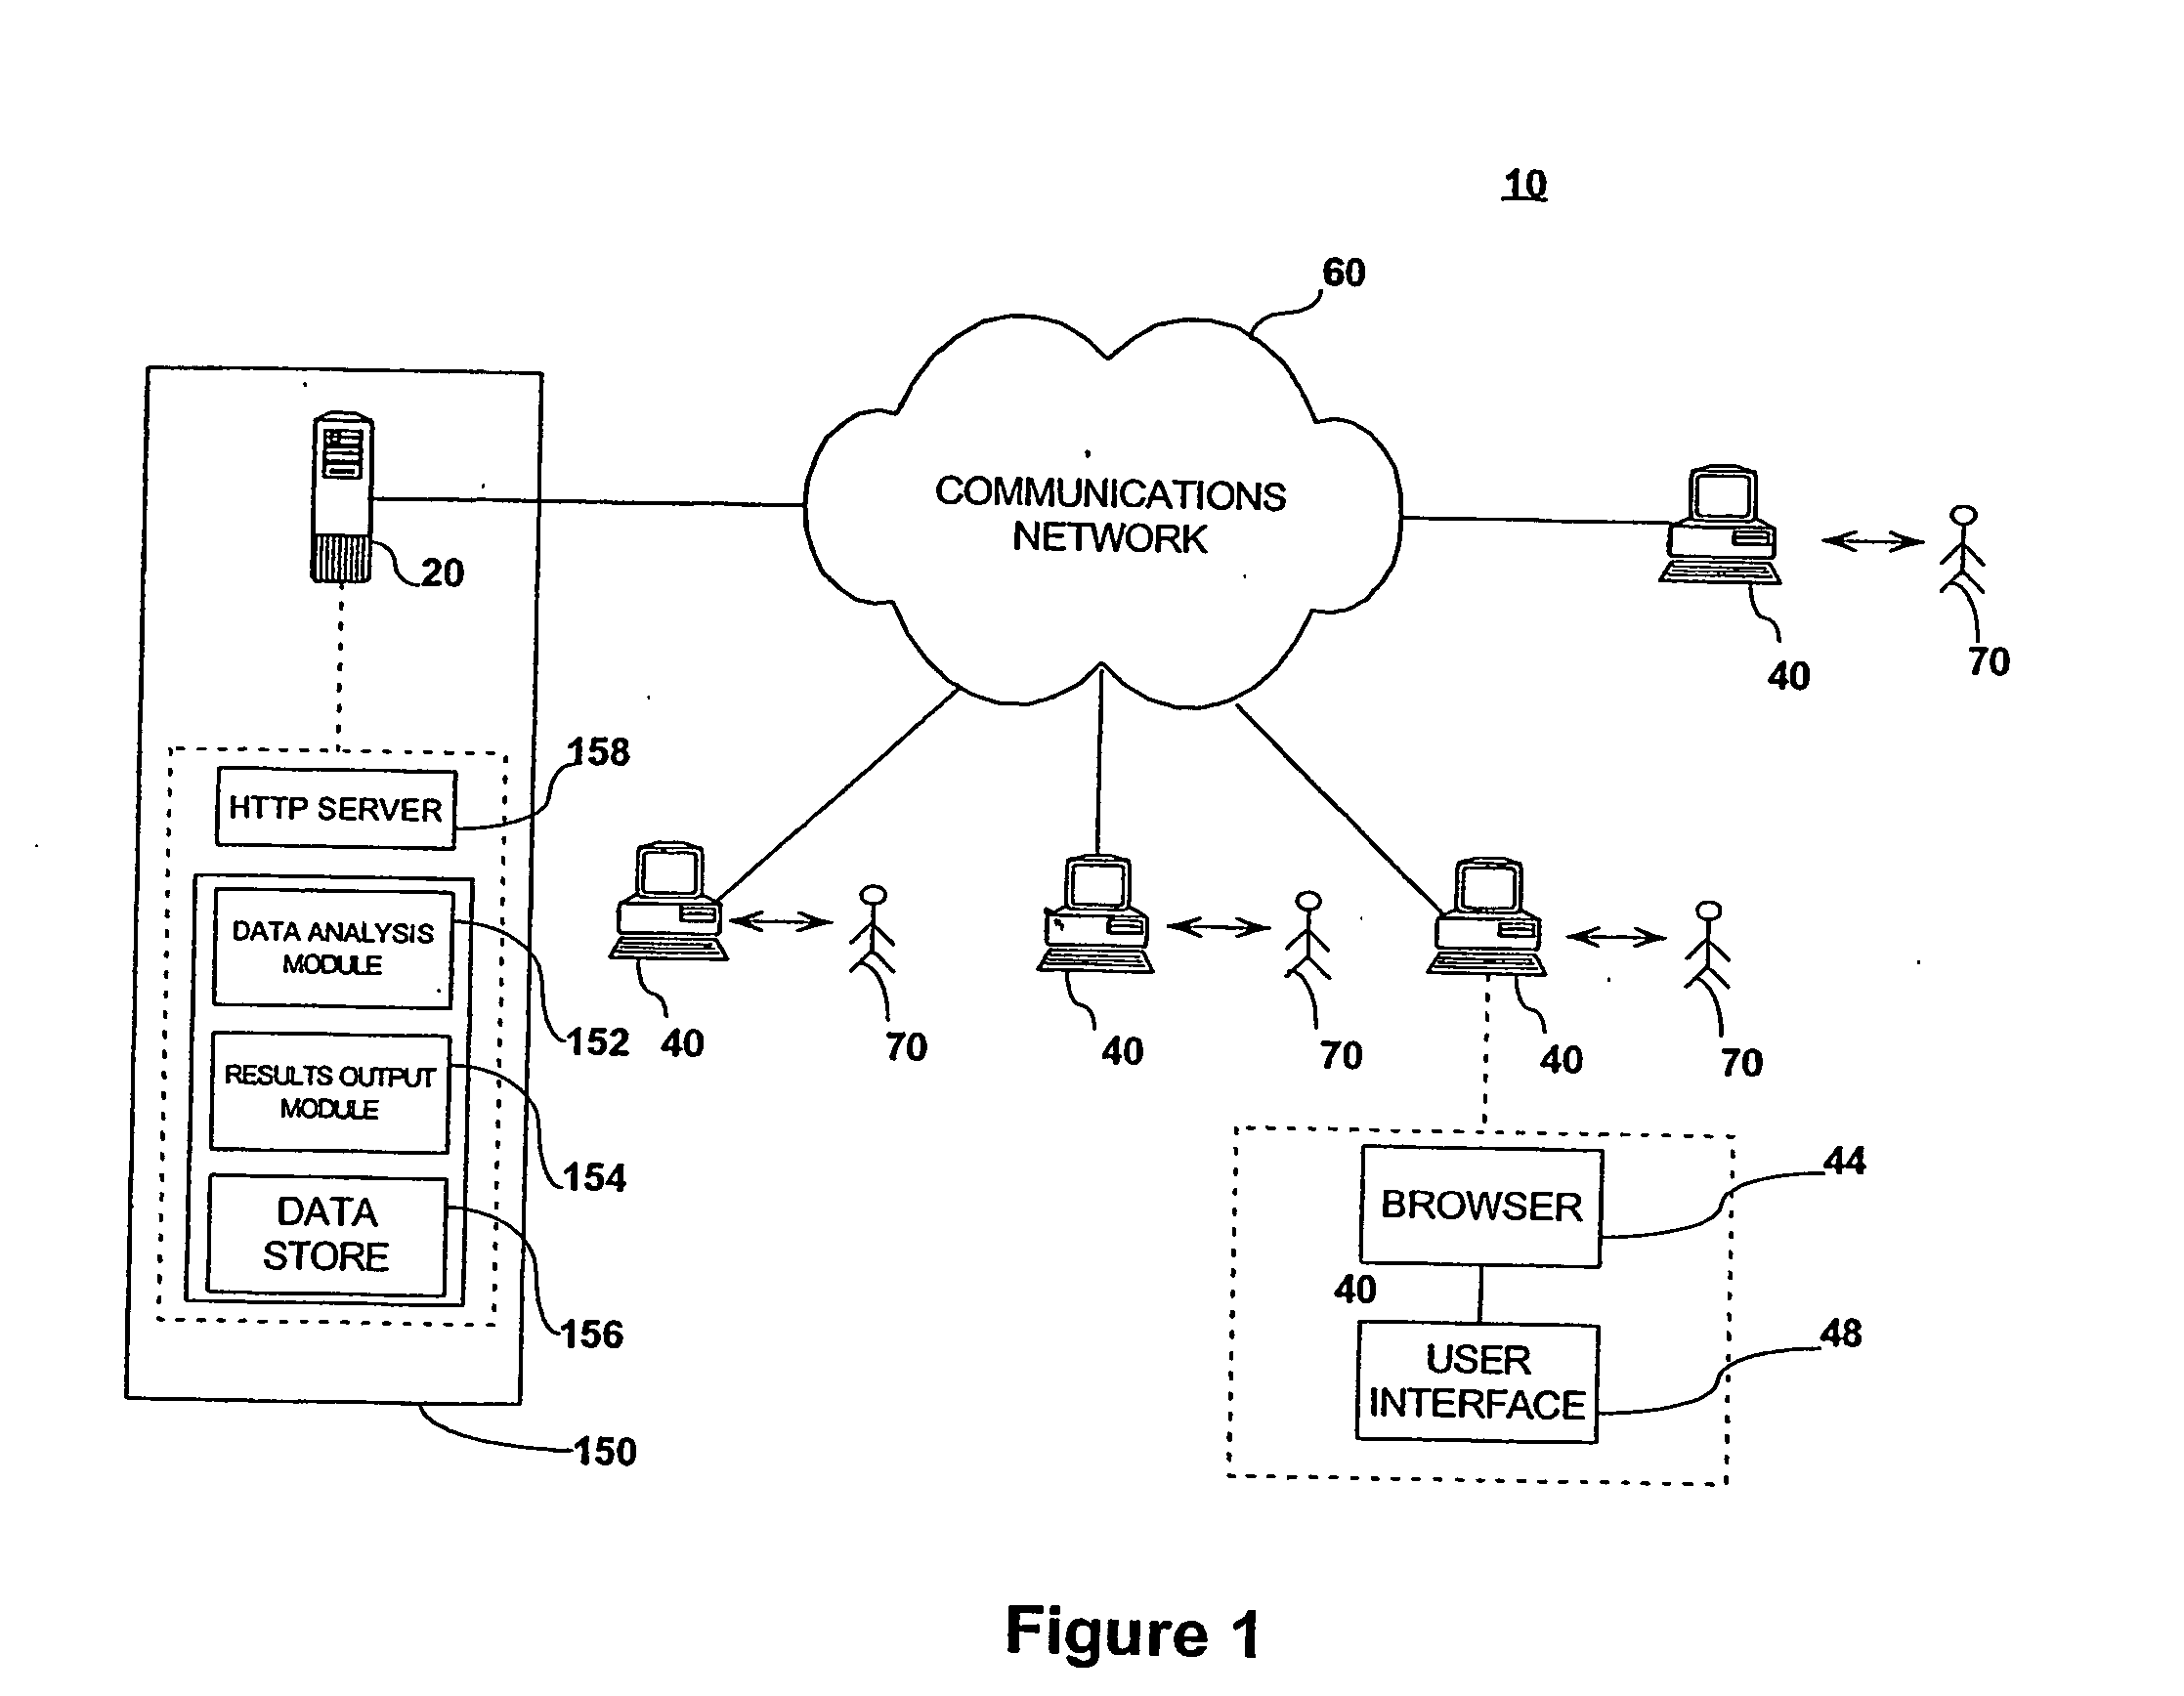 System and method for enhanced medicament-based treatment of disease